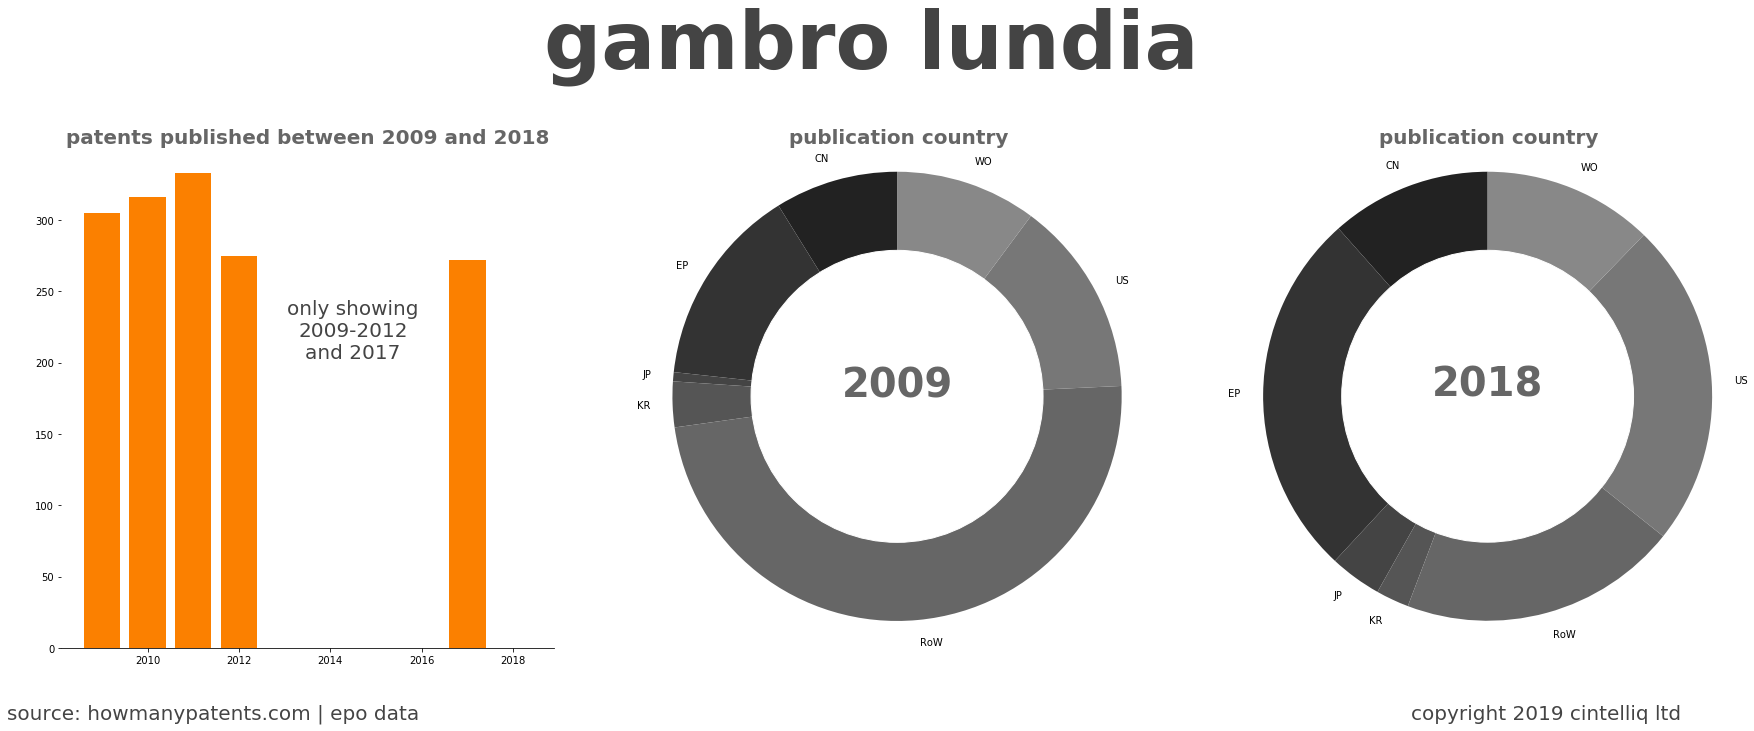 summary of patents for Gambro Lundia